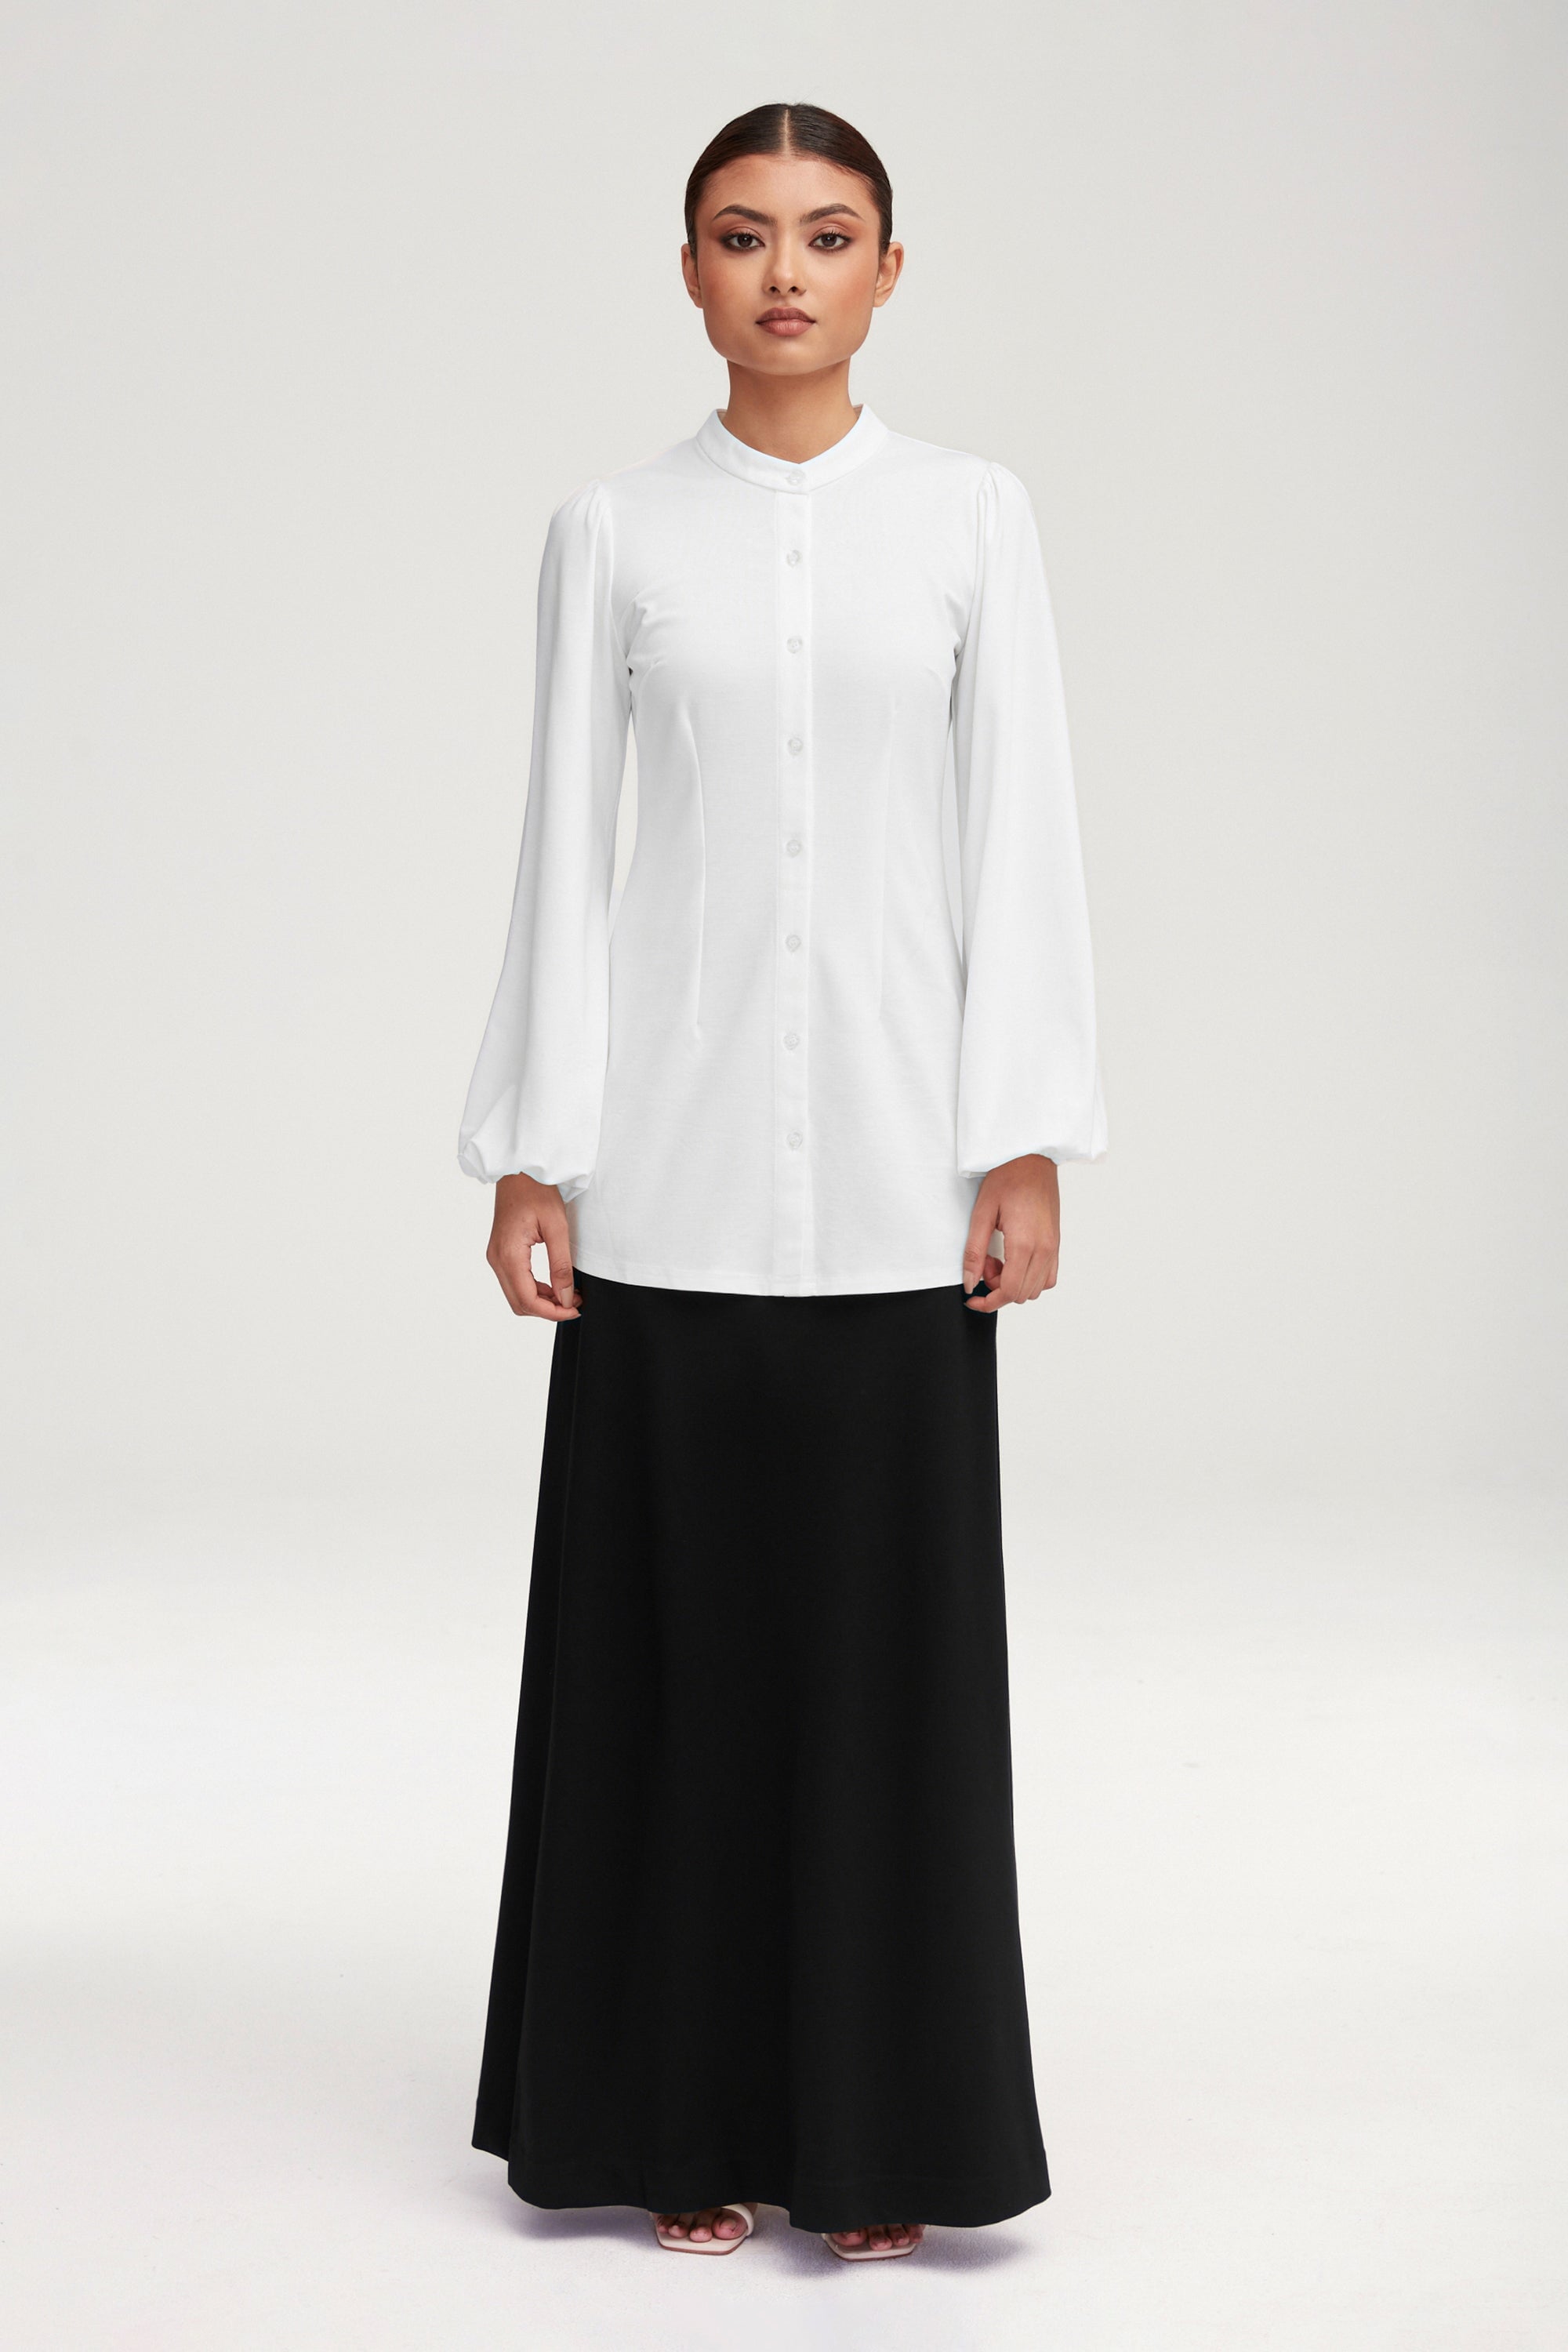 Rayana Jersey Button Down Top - White Clothing epschoolboard 